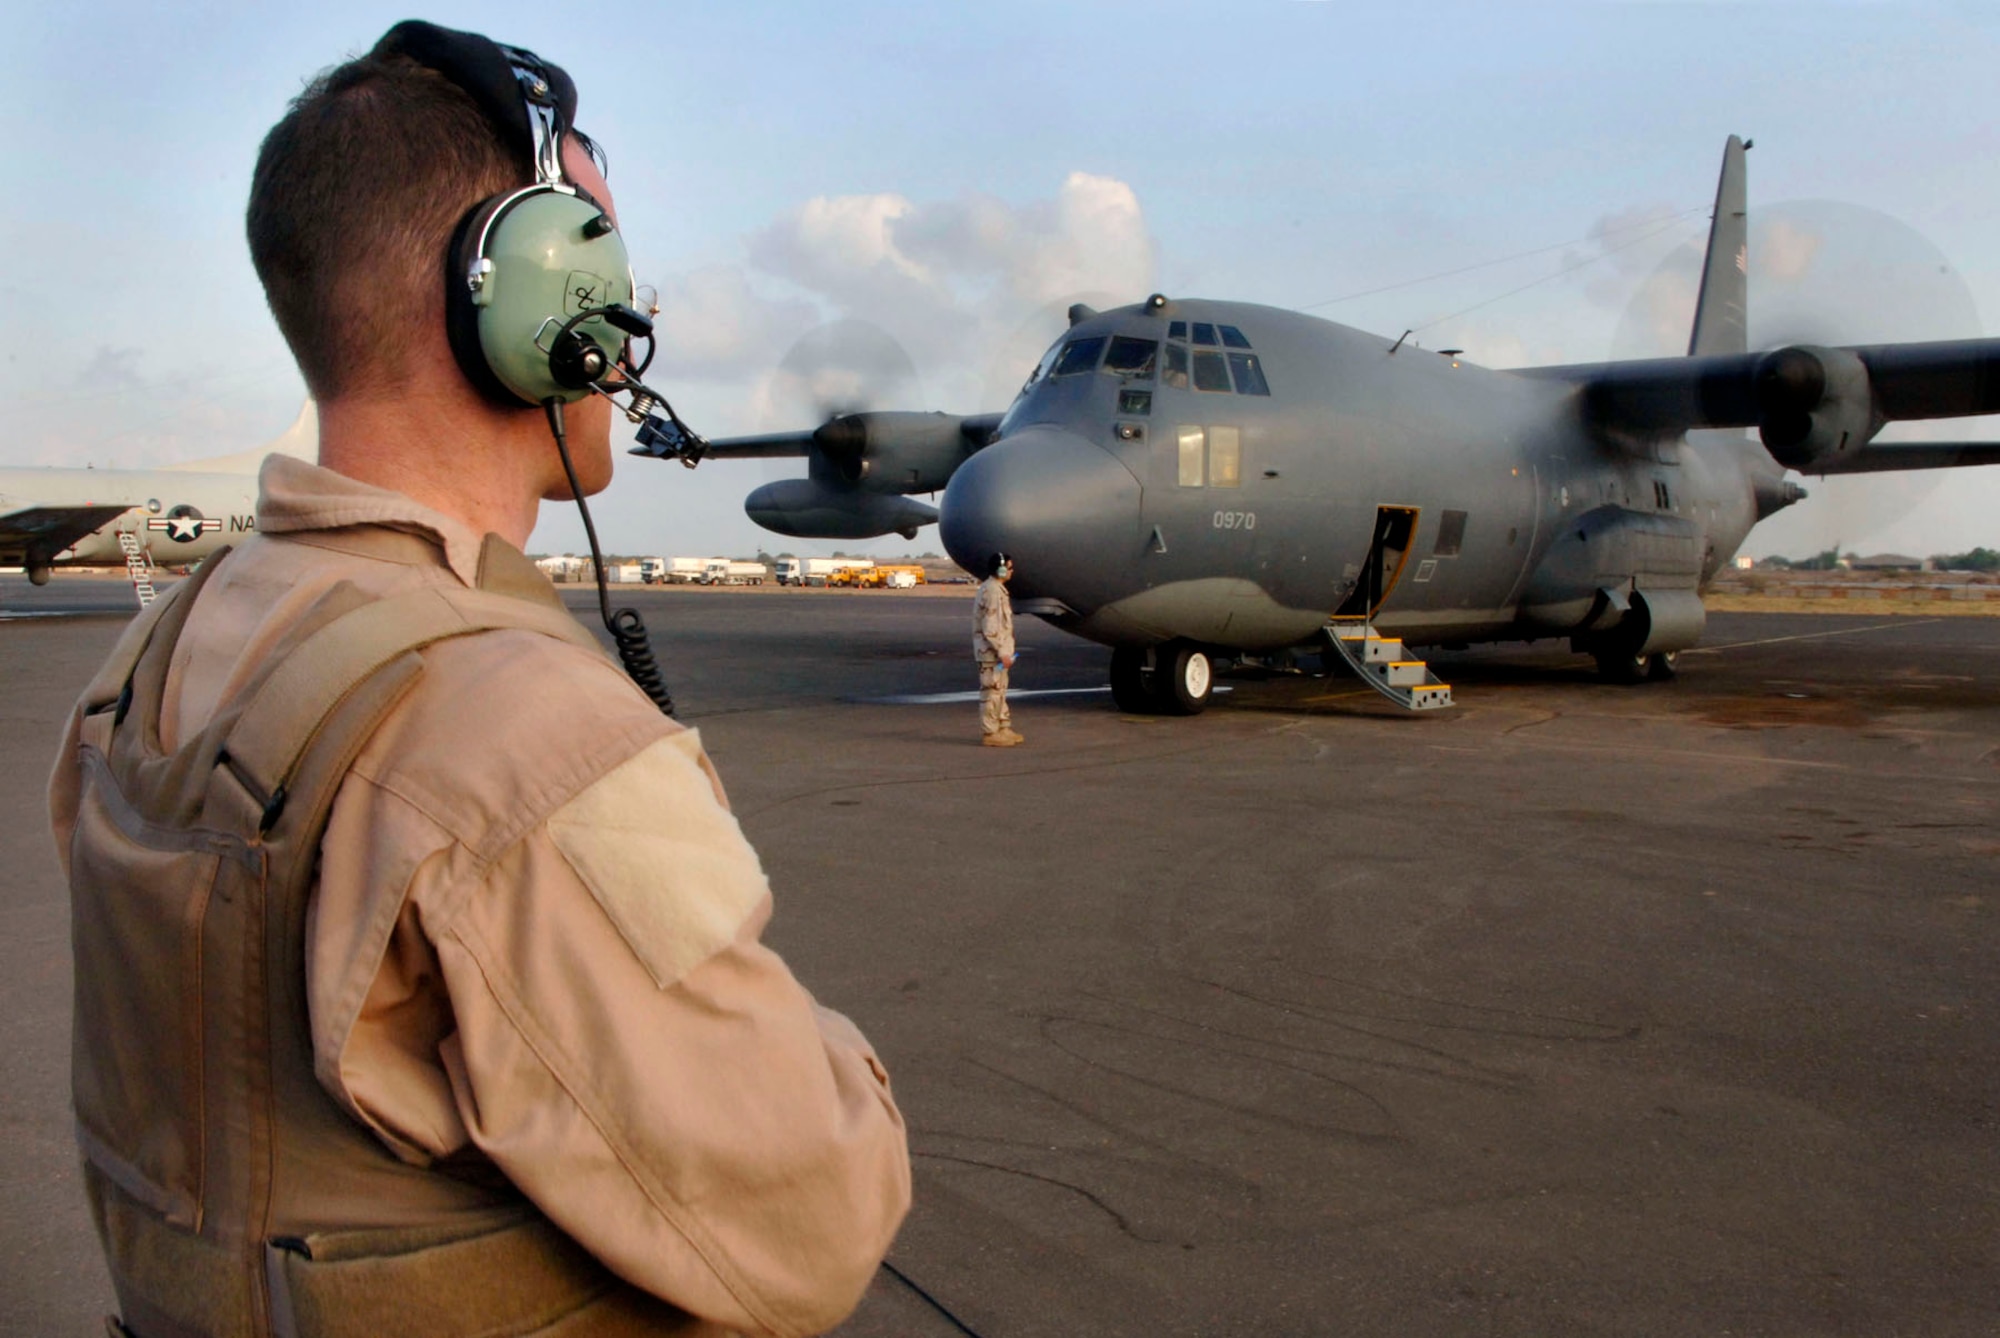 Senior Airman Mark Victor prepares an HC-130P for take off March 28 at Camp Lemonier, Djibouti, Africa, during a recent mission. Since May of 2003, Camp Lemonier has been the staging area for the combined joint task force that has built numerous schools, clinics and hospitals. The task force has also accomplished dozens of medical and dental exercises and humanitarian assistance missions.  Airman Victor is a loadmaster deployed from the 39th Rescue Squadron at Patrick Air Force Base, Fla. (U.S. Air Force photo/Daren Reehl)